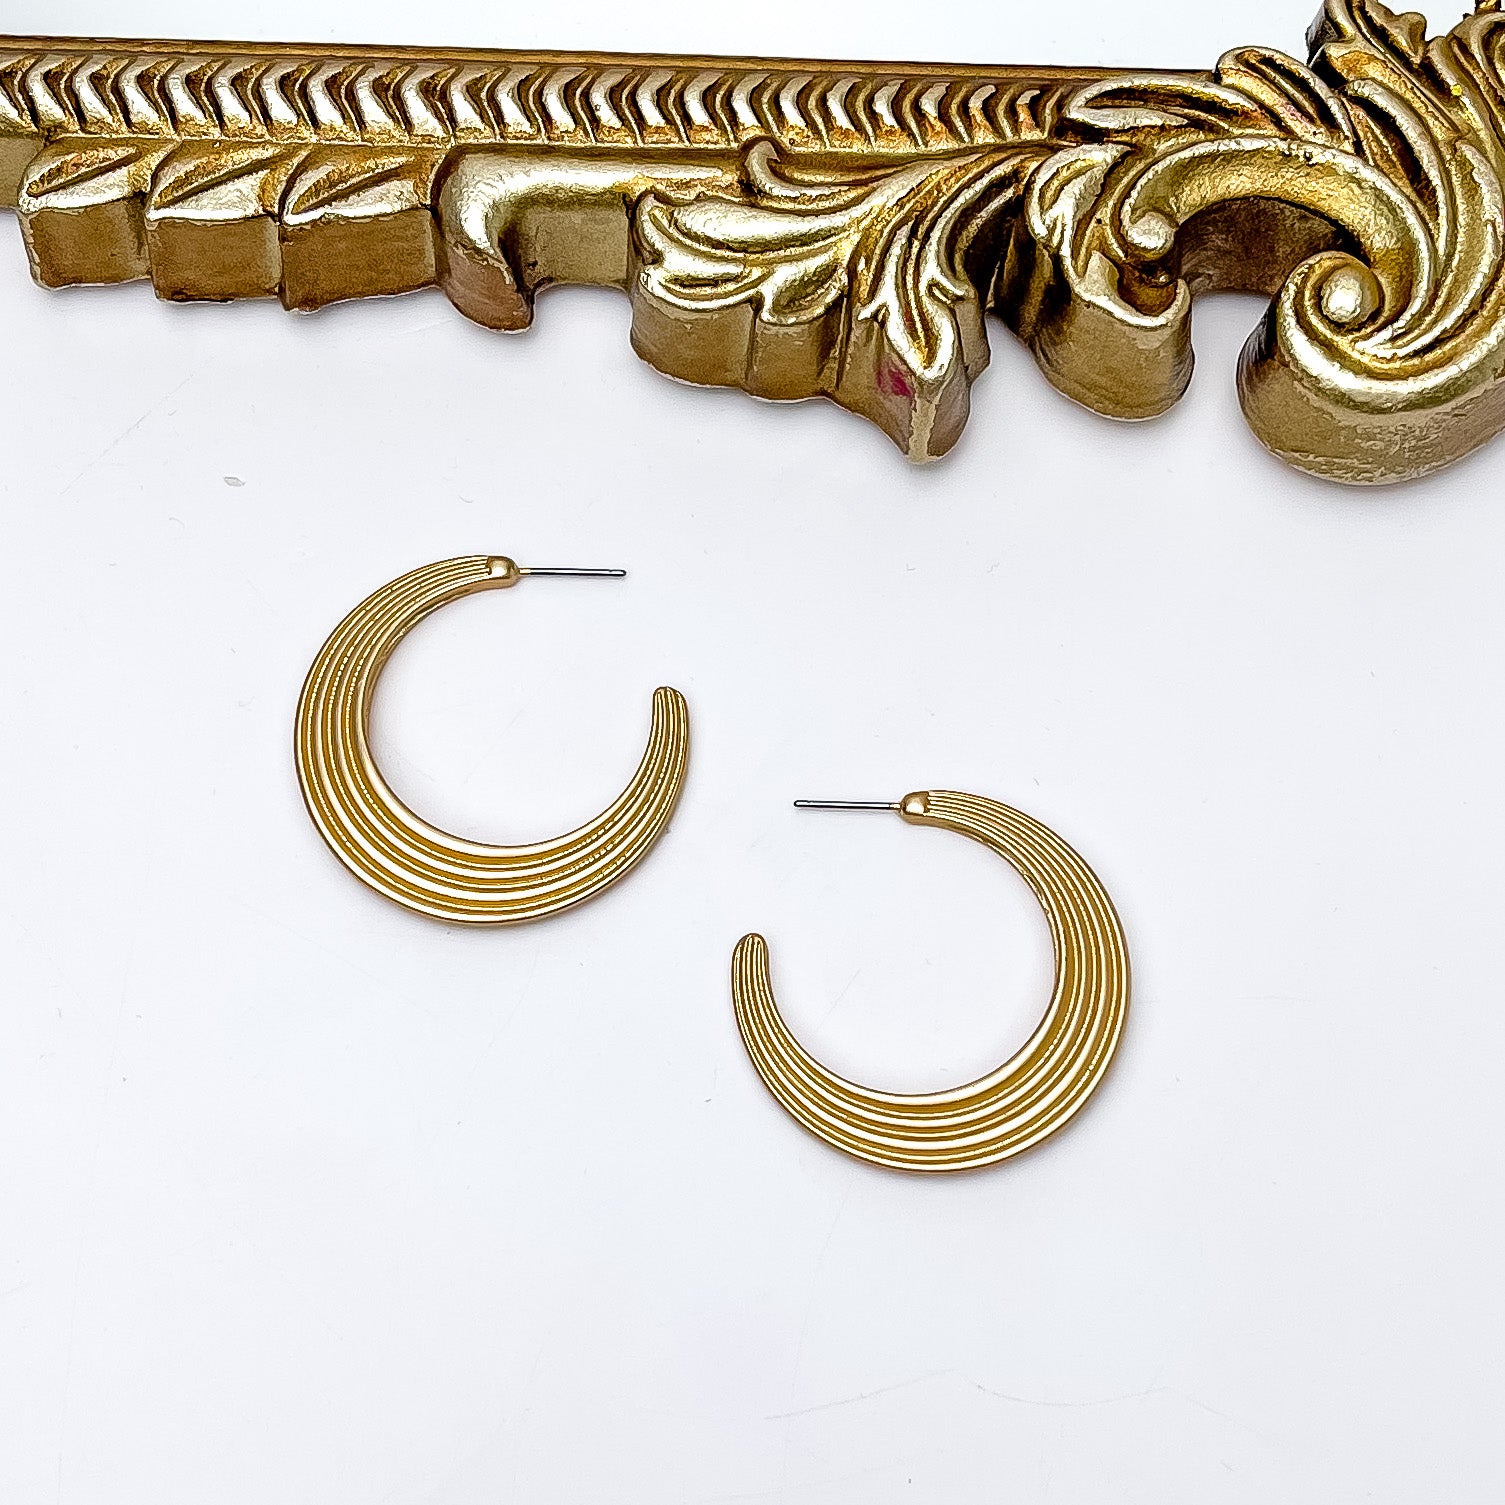 Livin' Life Gold Tone Large Hoop Earrings. Pictured on a white background with a gold frame above the earrings.